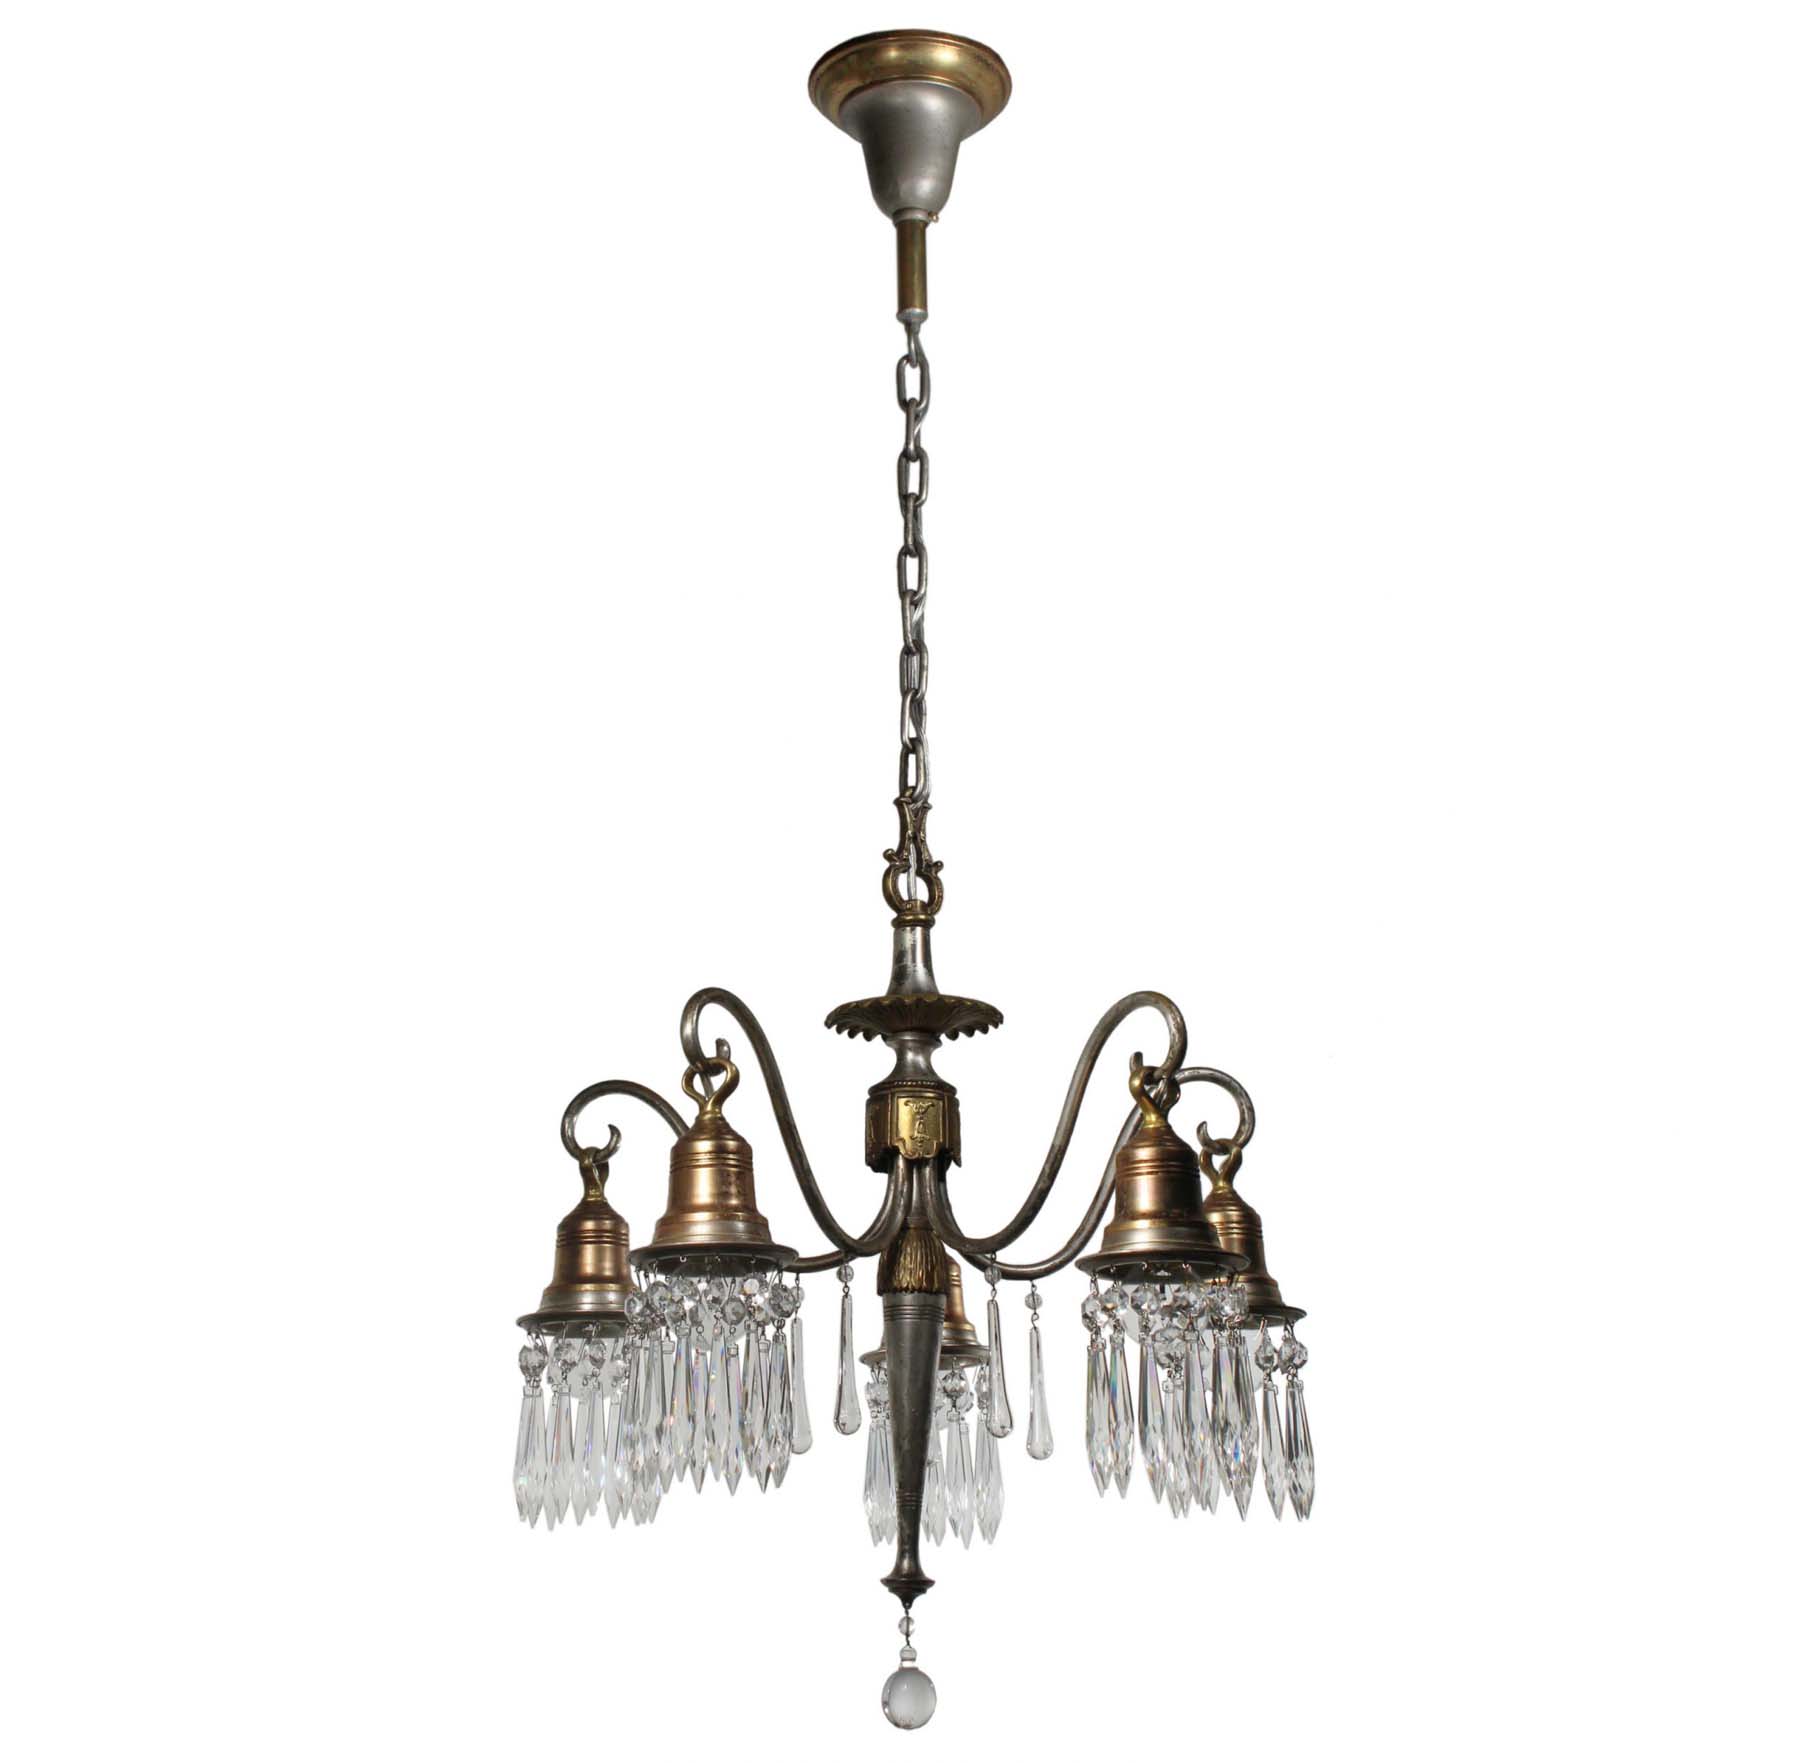 SOLD Neoclassical Chandelier with Prisms, Antique Lighting-68394